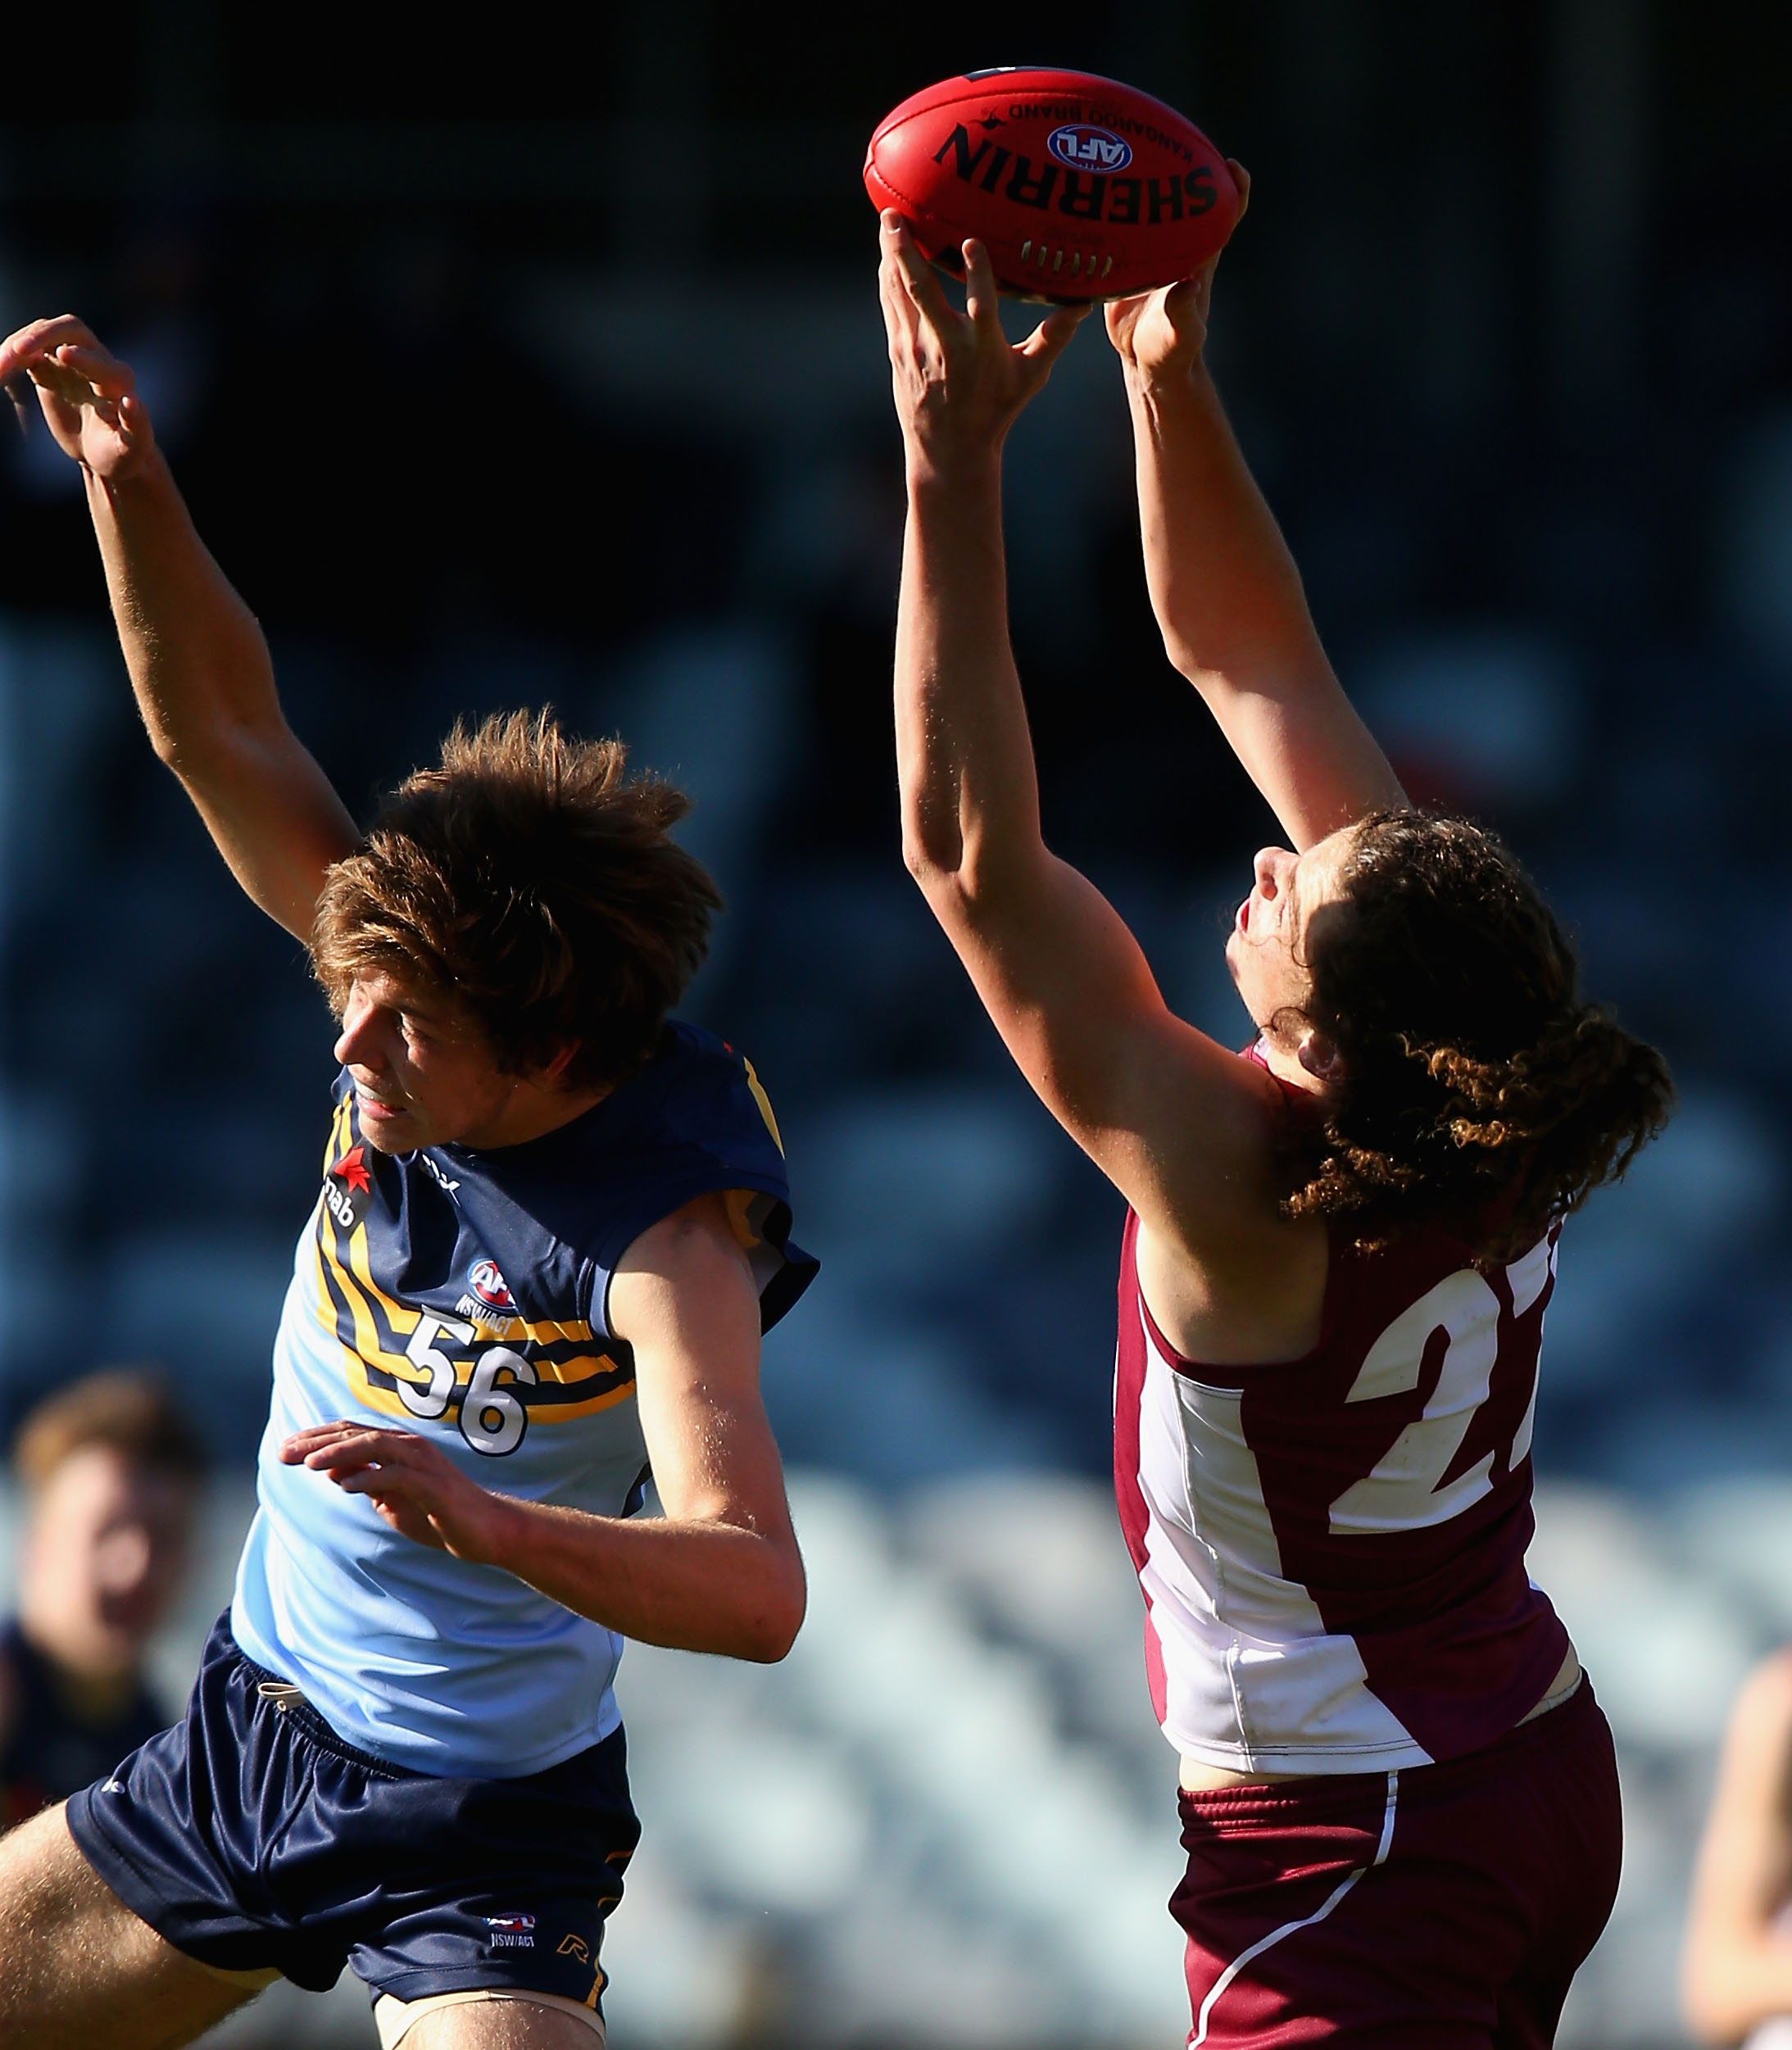 GEELONG, AUSTRALIA - JULY 2: Wylie Buzza of QLD marks during the 2015 AFL Under 18 match between NSW/ACT and Queensland at Simonds Stadium, Geelong, Australia on July 2, 2015. (Photo by Sean Garnsworthy/AFL Media)